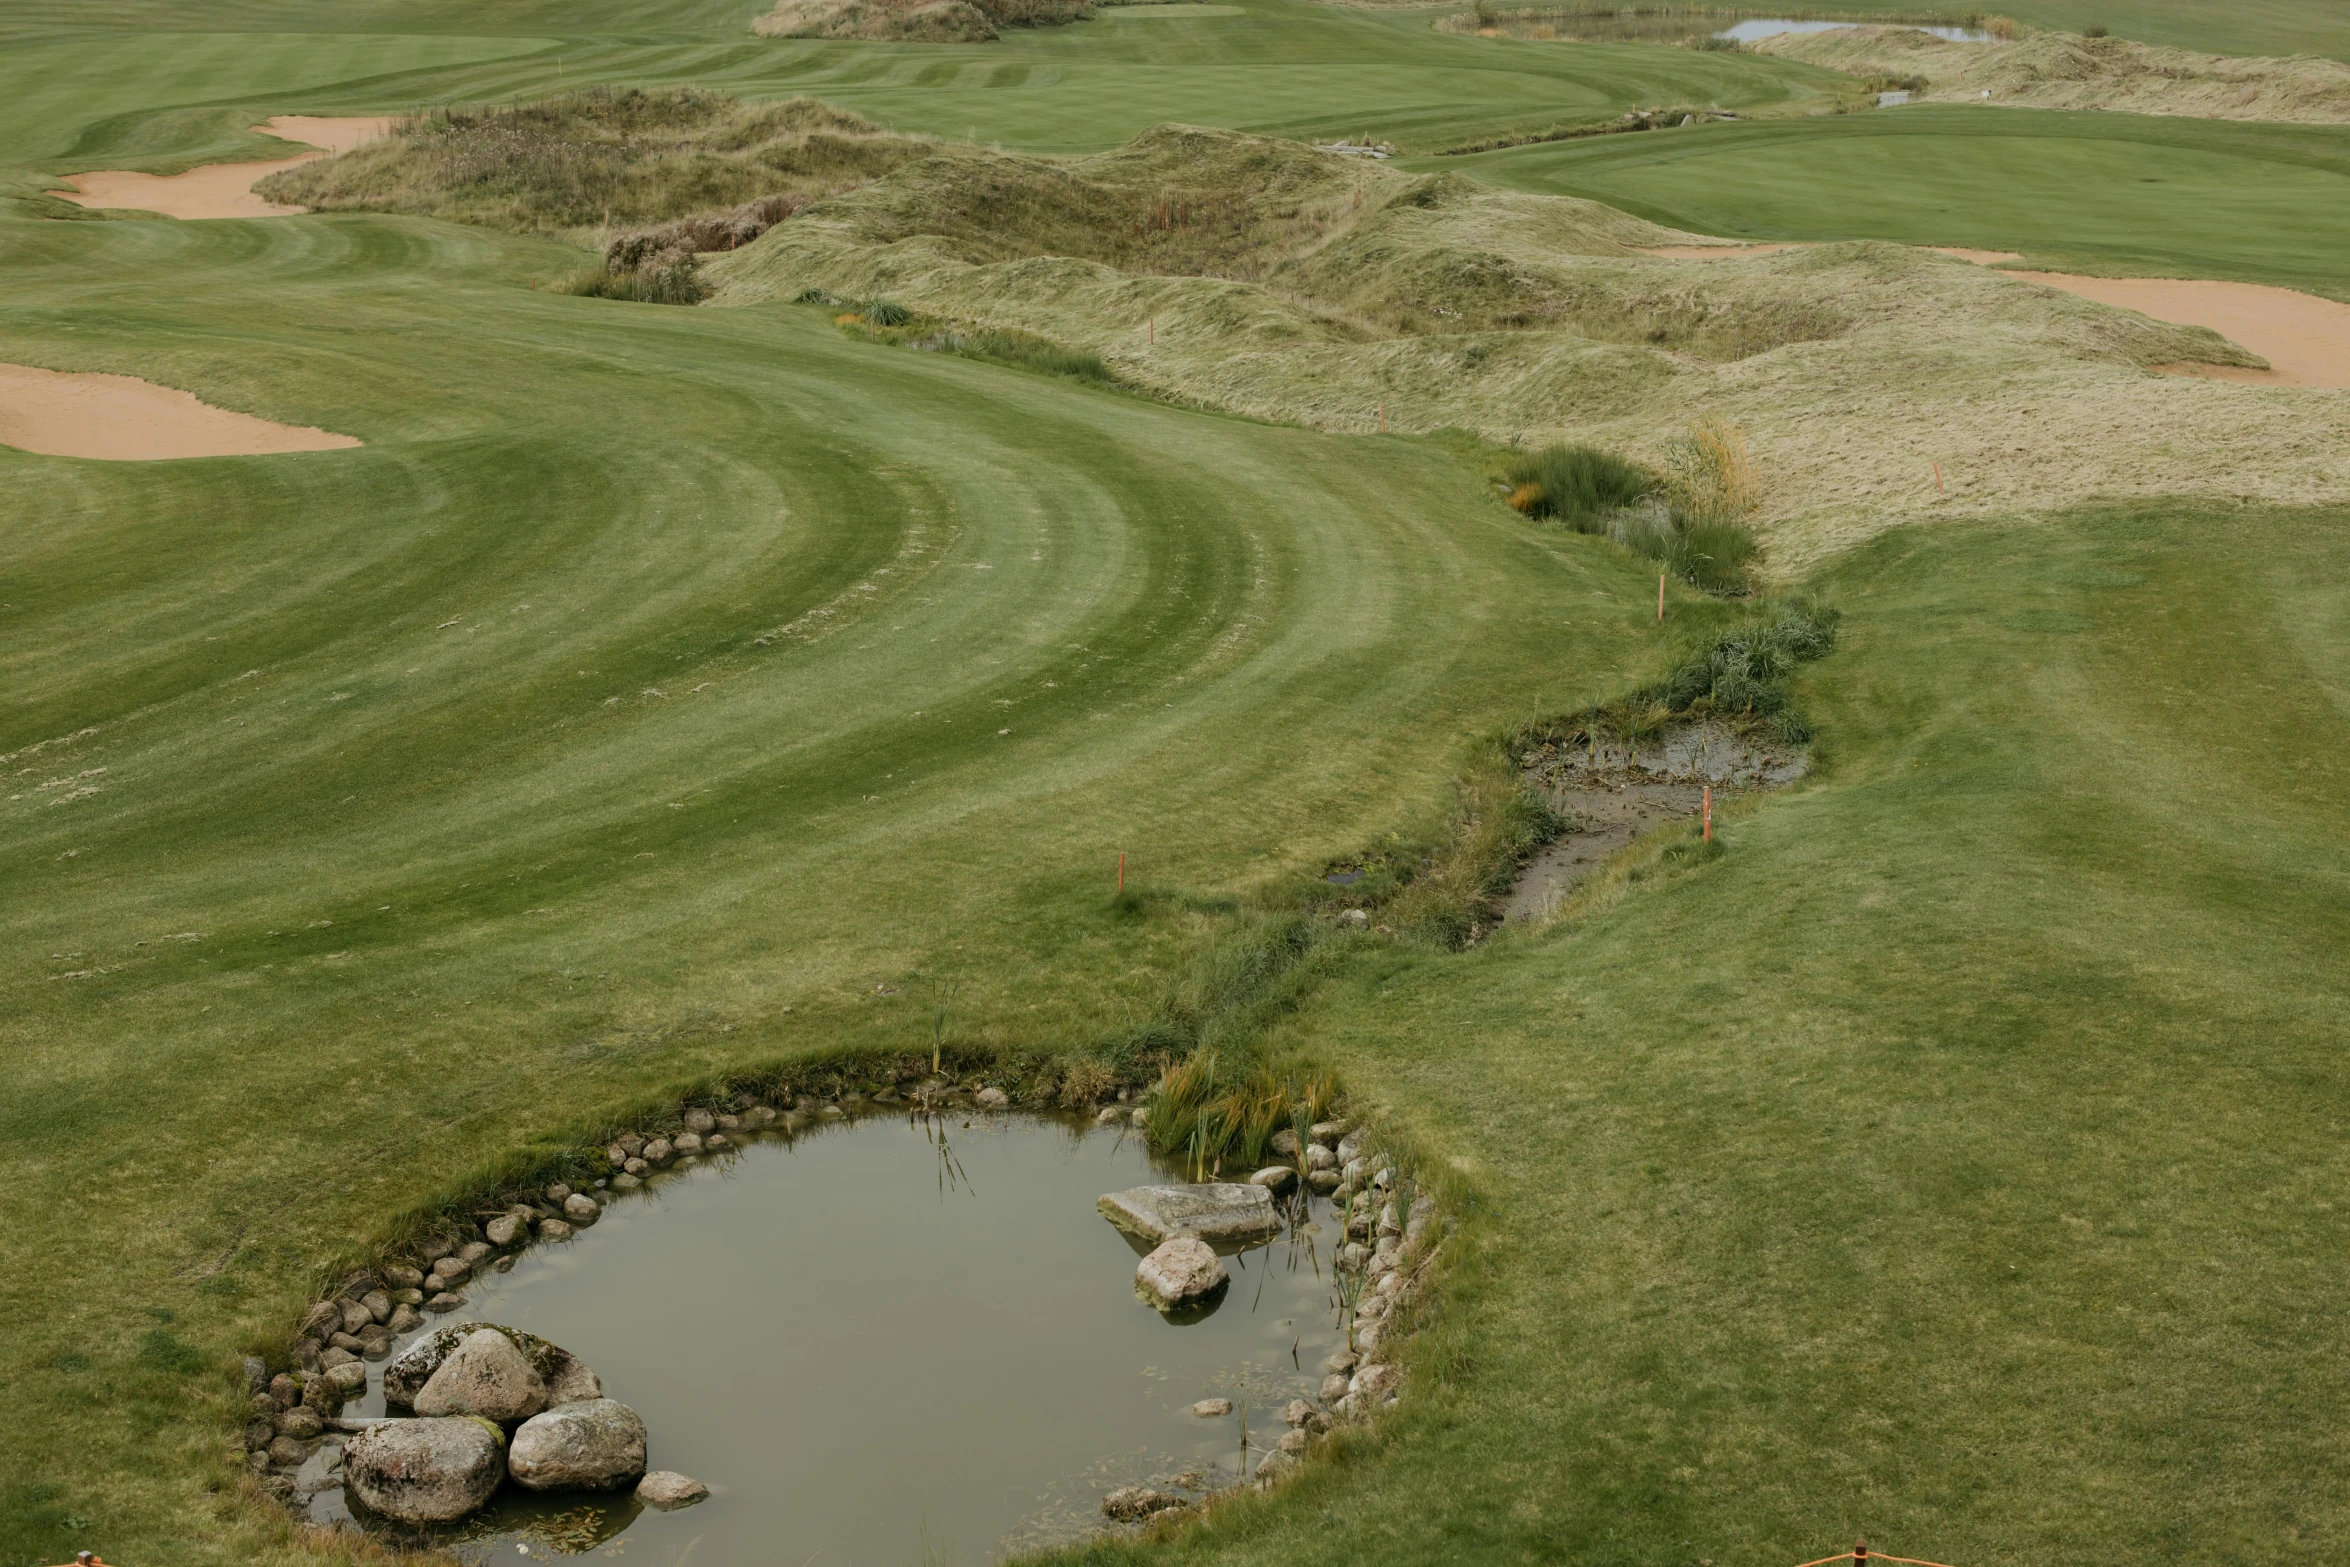 a golf course with a pond in the middle, by David Simpson, unsplash, land art, erosion channels river, whealan, grassy hill, thumbnail